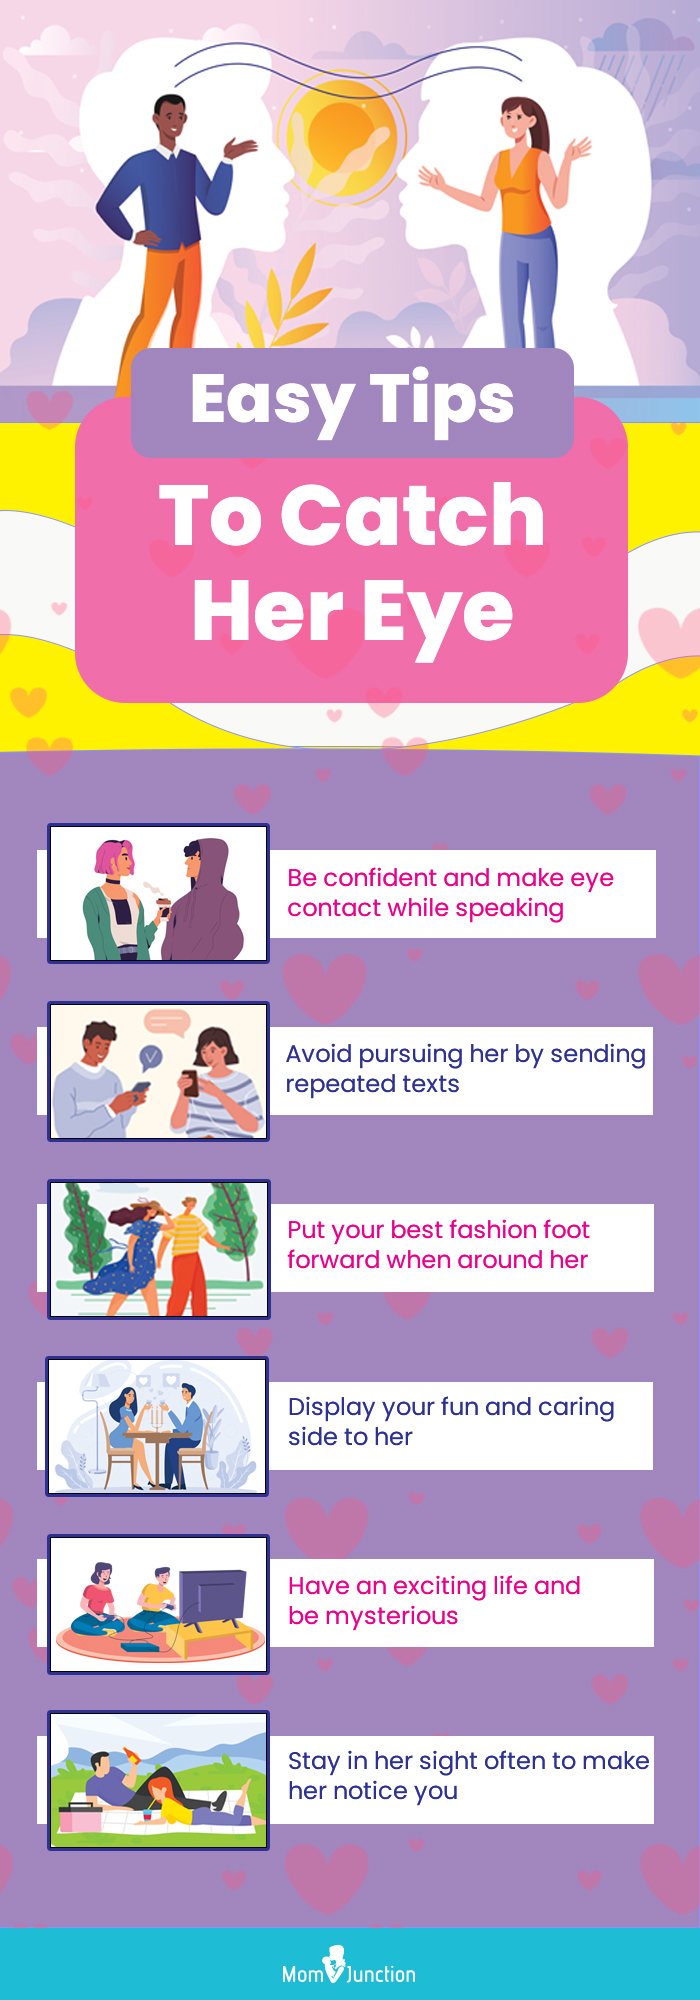 eazy tips to catch her eye (infographic)